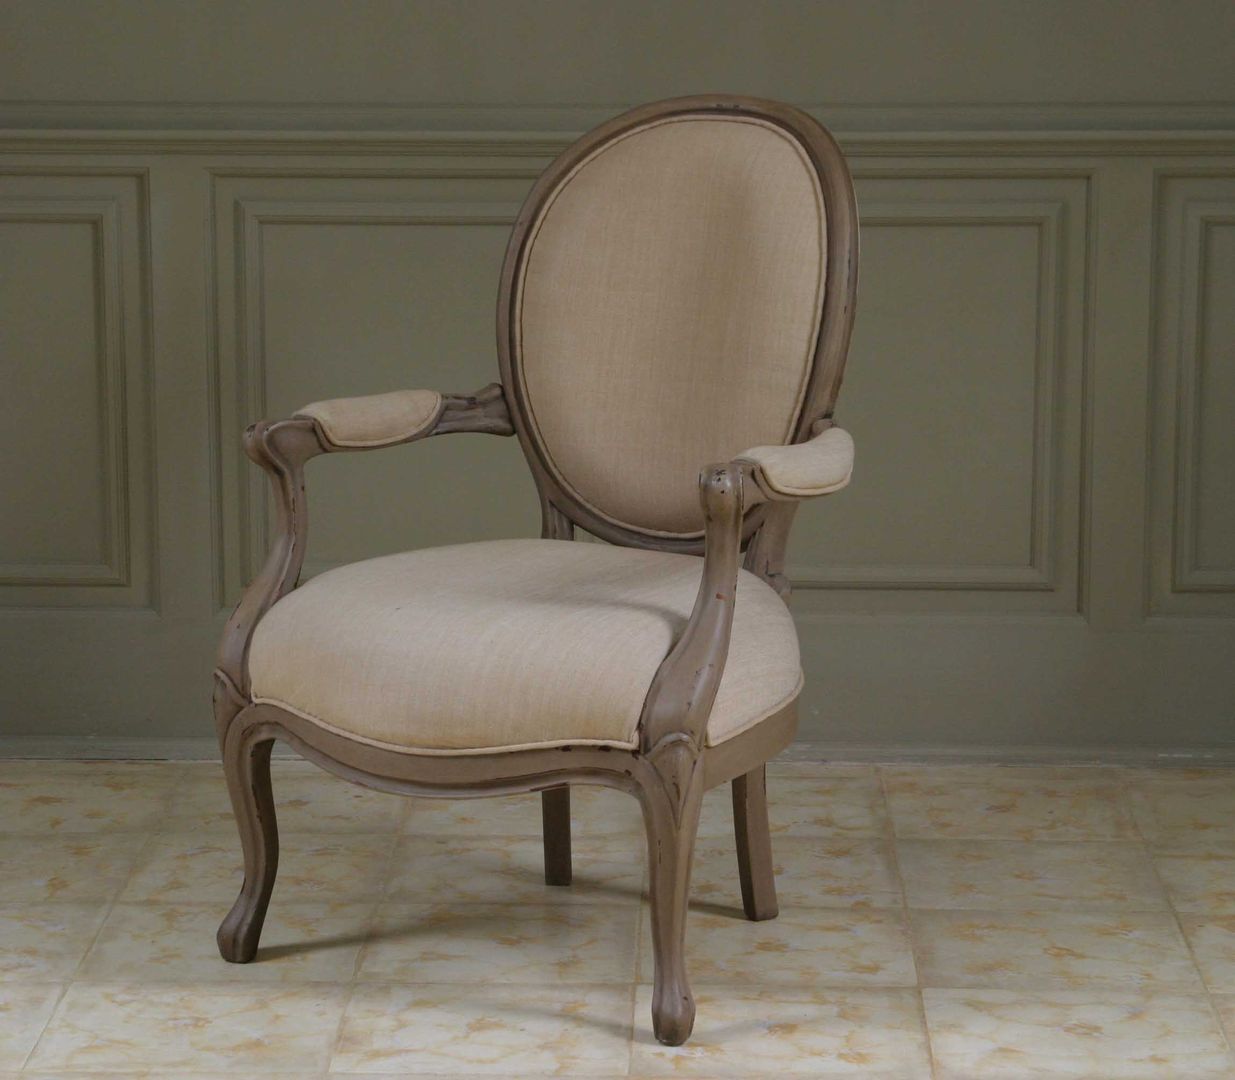 Colección II Chair and sofa, The best houses The best houses Colonial style living room Stools & chairs